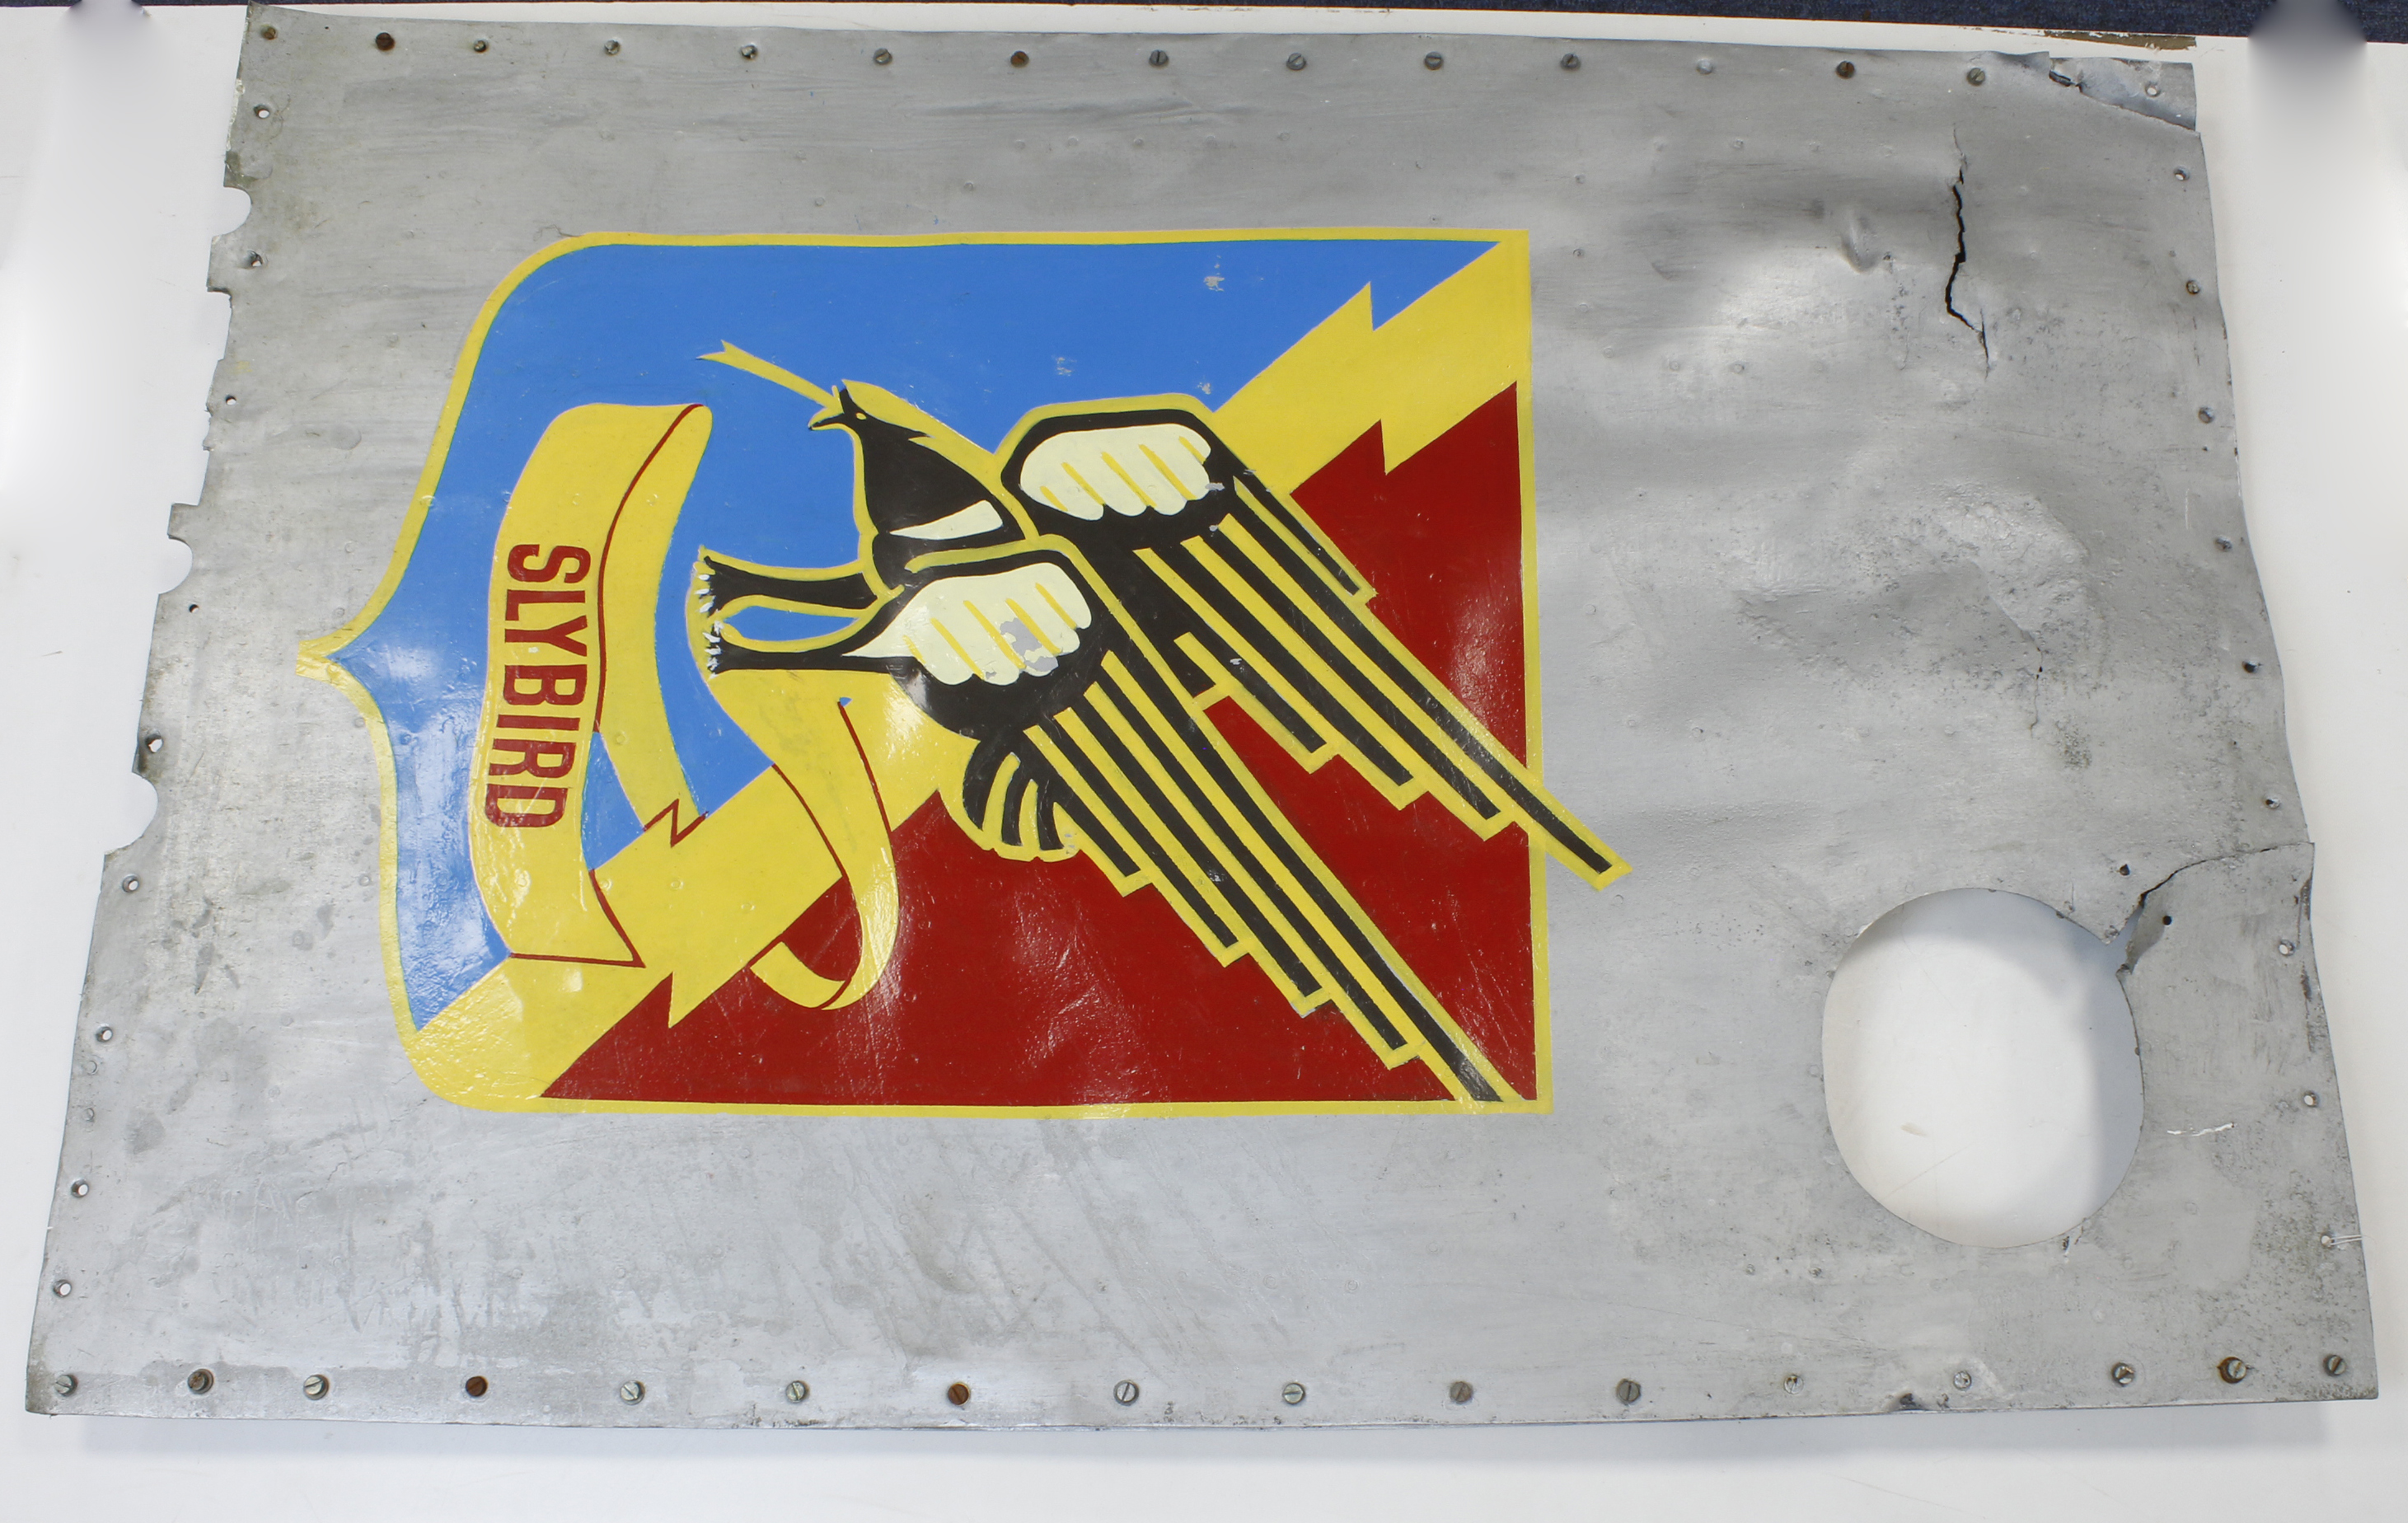 Russian large section of a Yak 1 fighter crashed into a lake in Russia, with recent artwork.